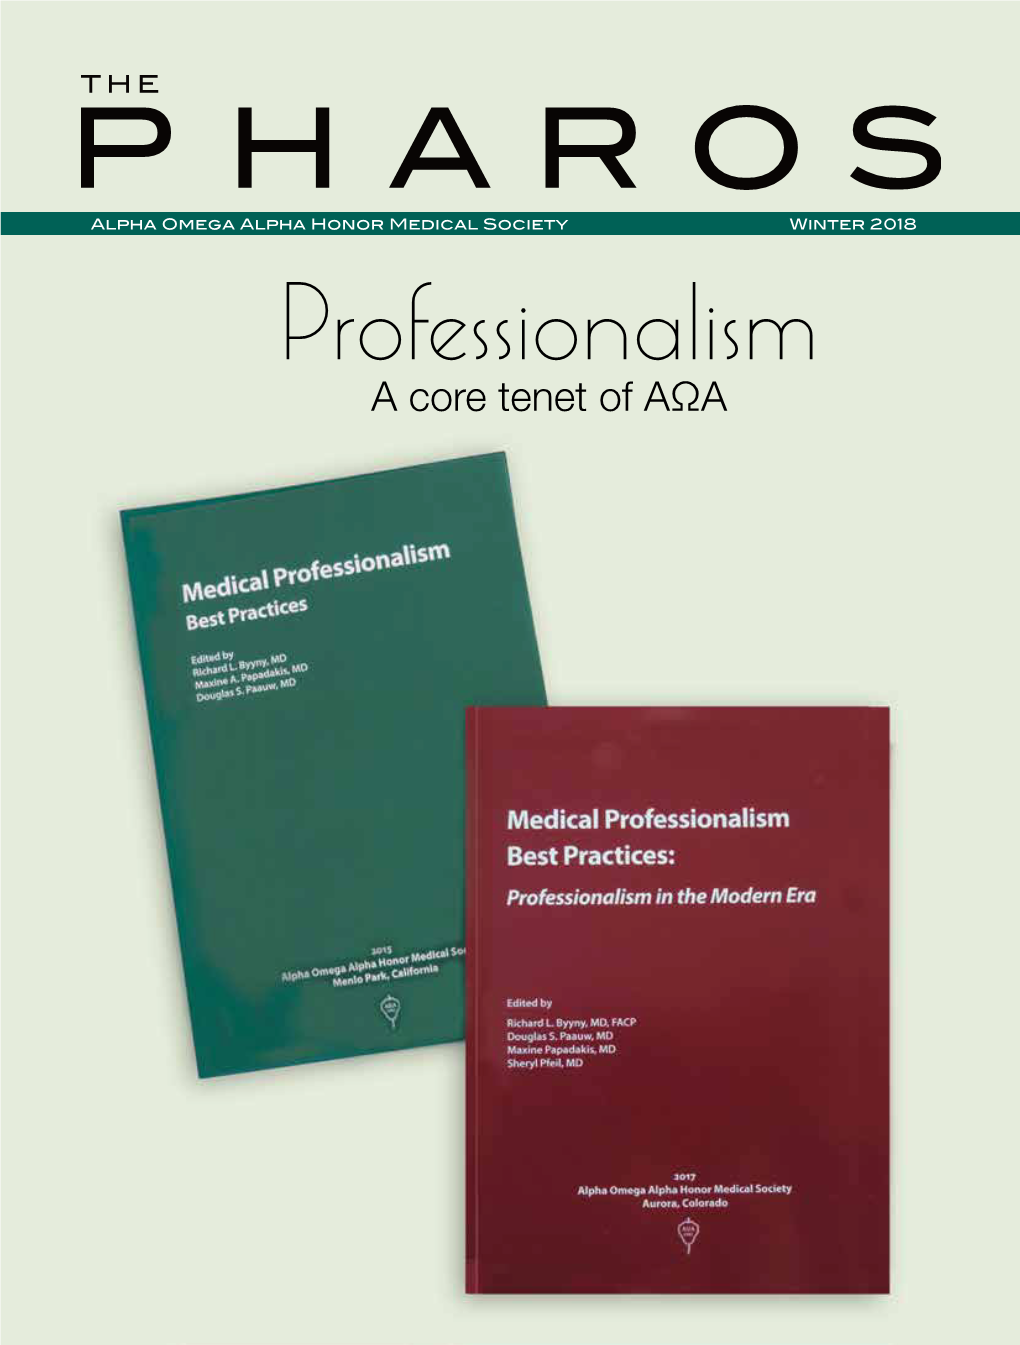 Download the Pharos Winter 2018 Edition